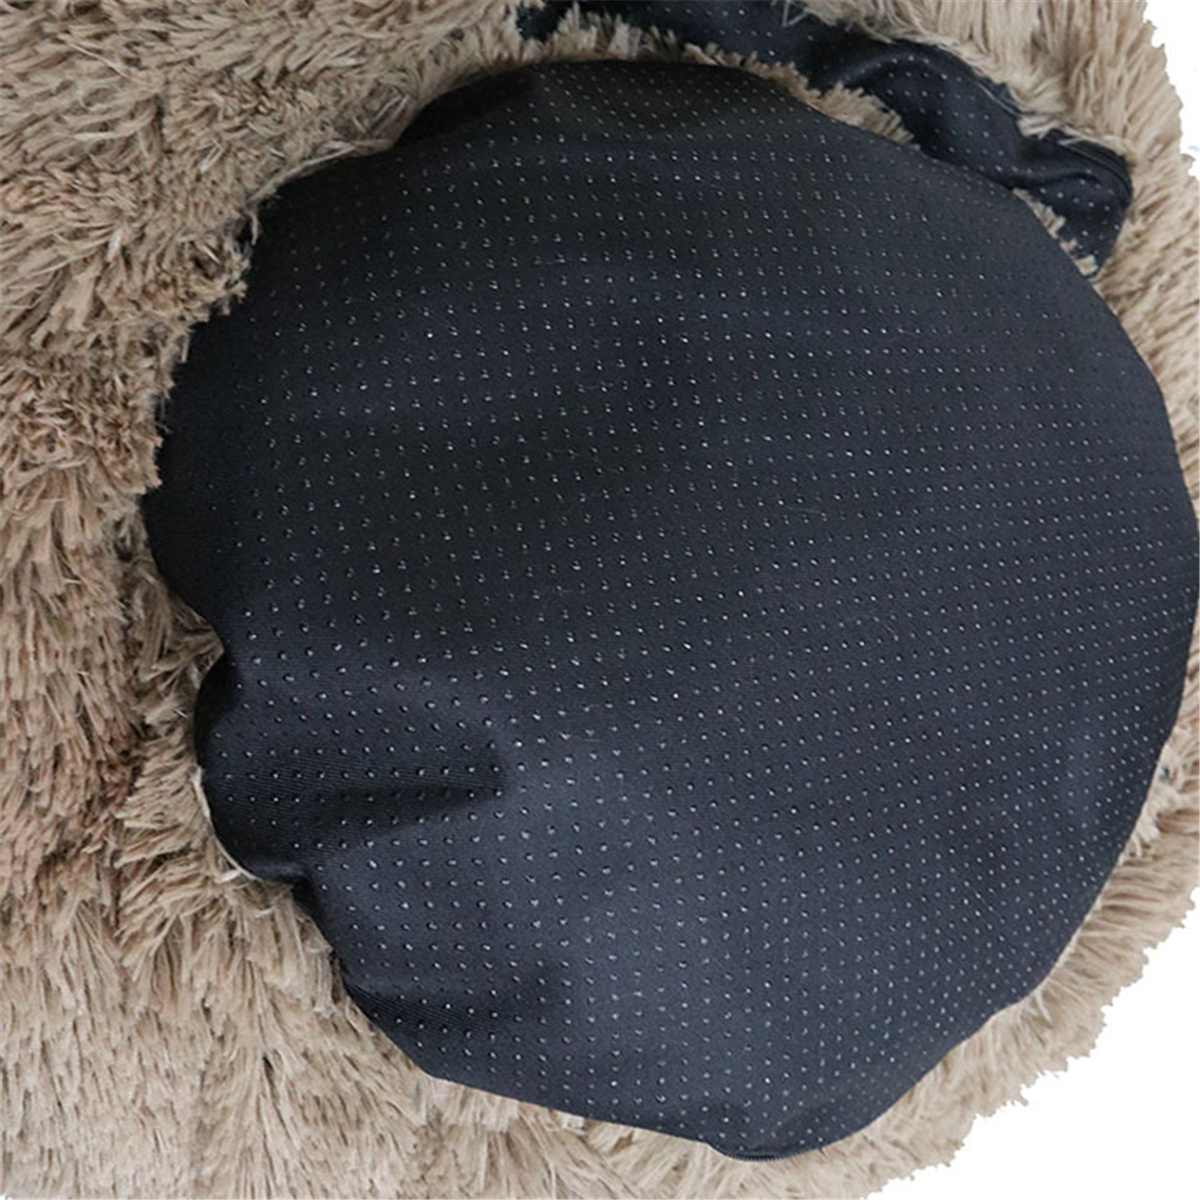 4-Size-Dog-Cat-Round-Bed-Sleeping-Bed-Plush-Pet-Bed-Kennel-Sleeping-Cushion-Puppy-1475650-5